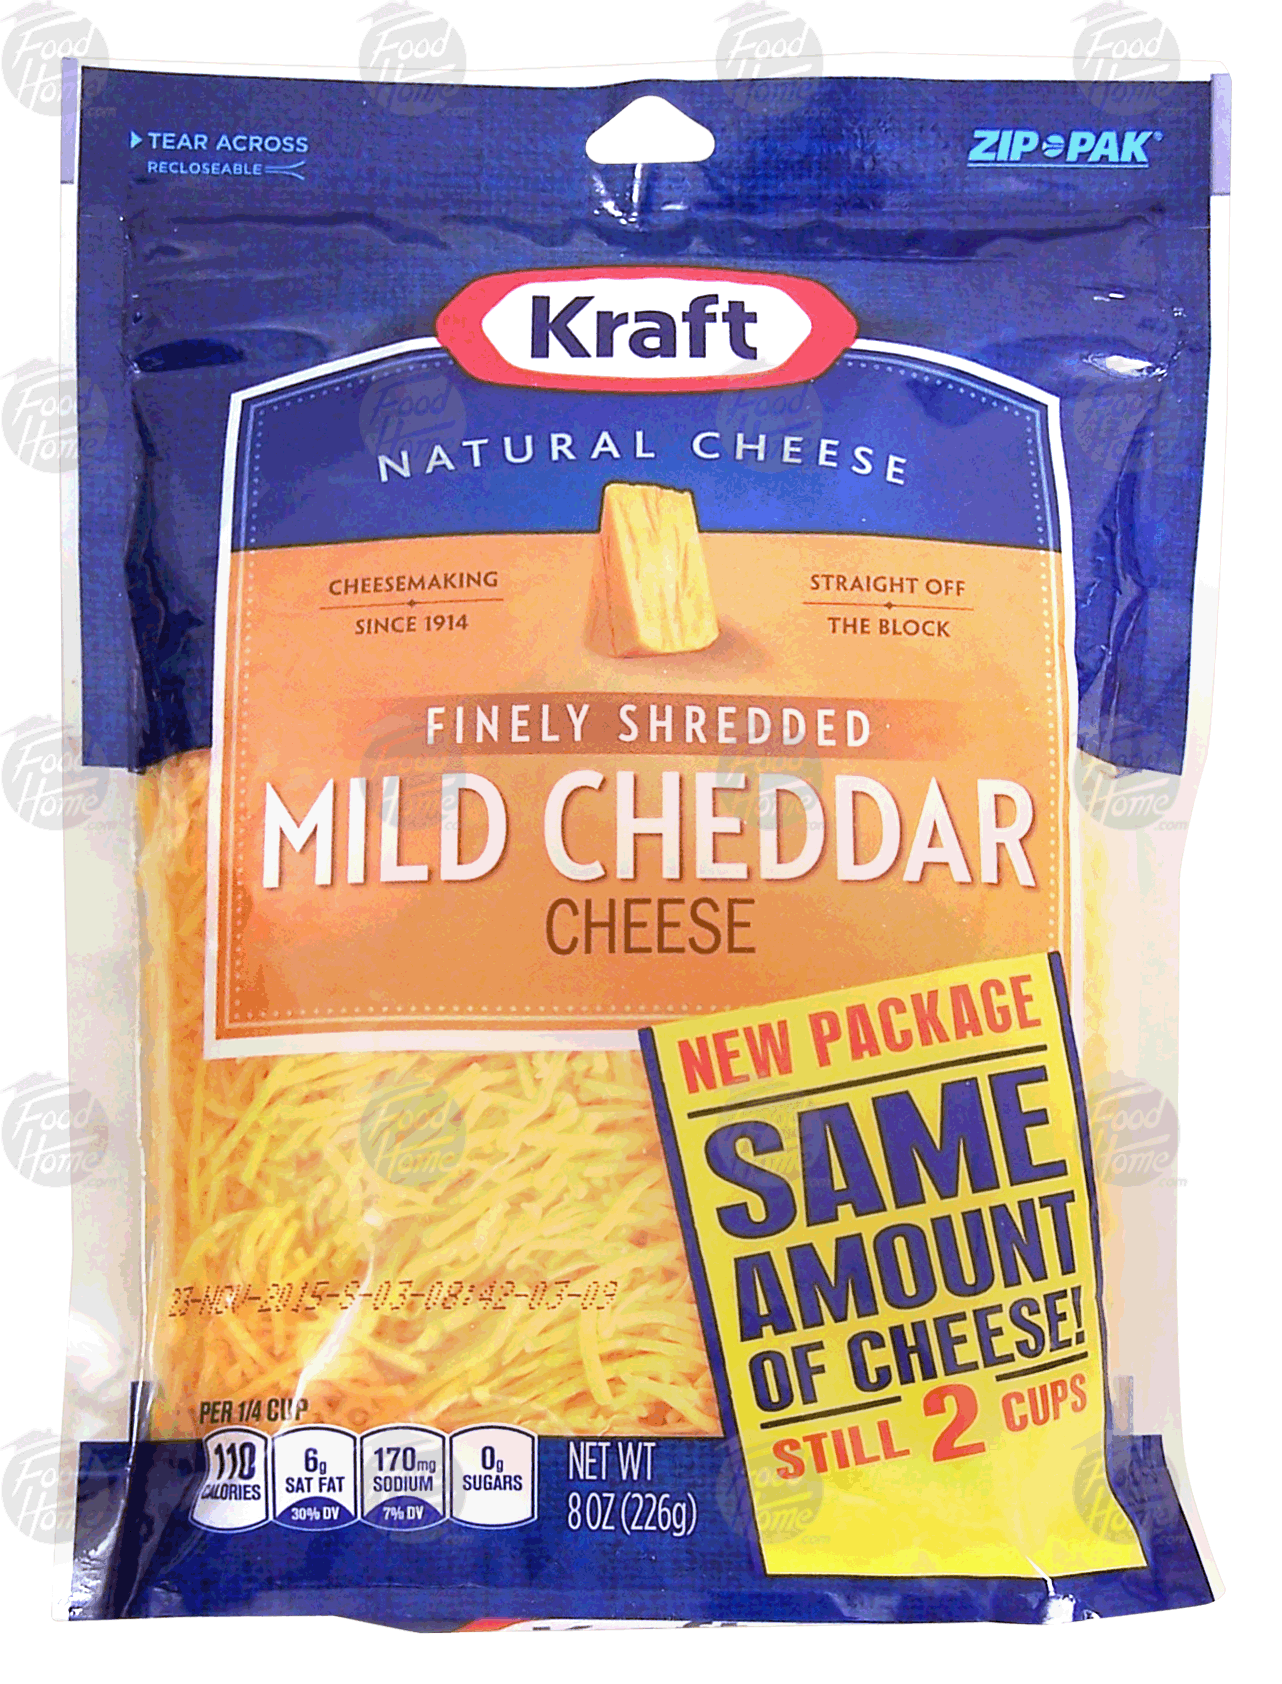 Kraft Natural Cheese mild cheddar finely shredded cheese Full-Size Picture